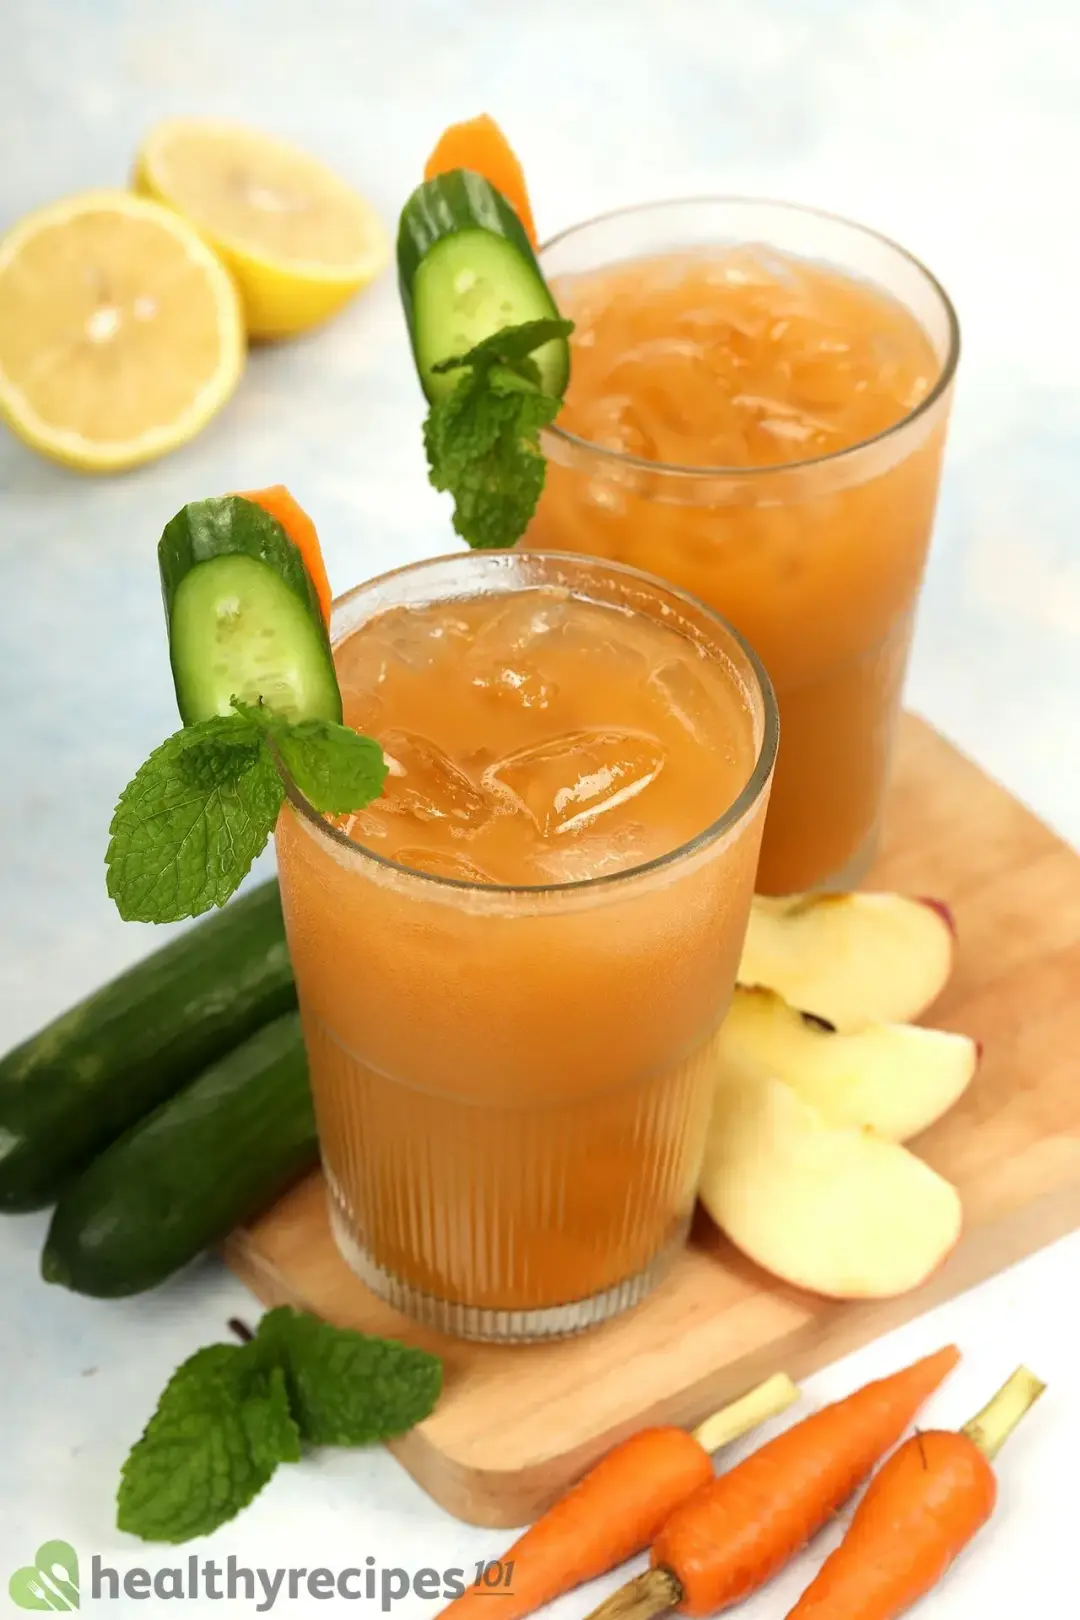 Two glasses of iced carrot cucumber drinks next to apple slices, baby carrots, cucumber, and lemon wheels